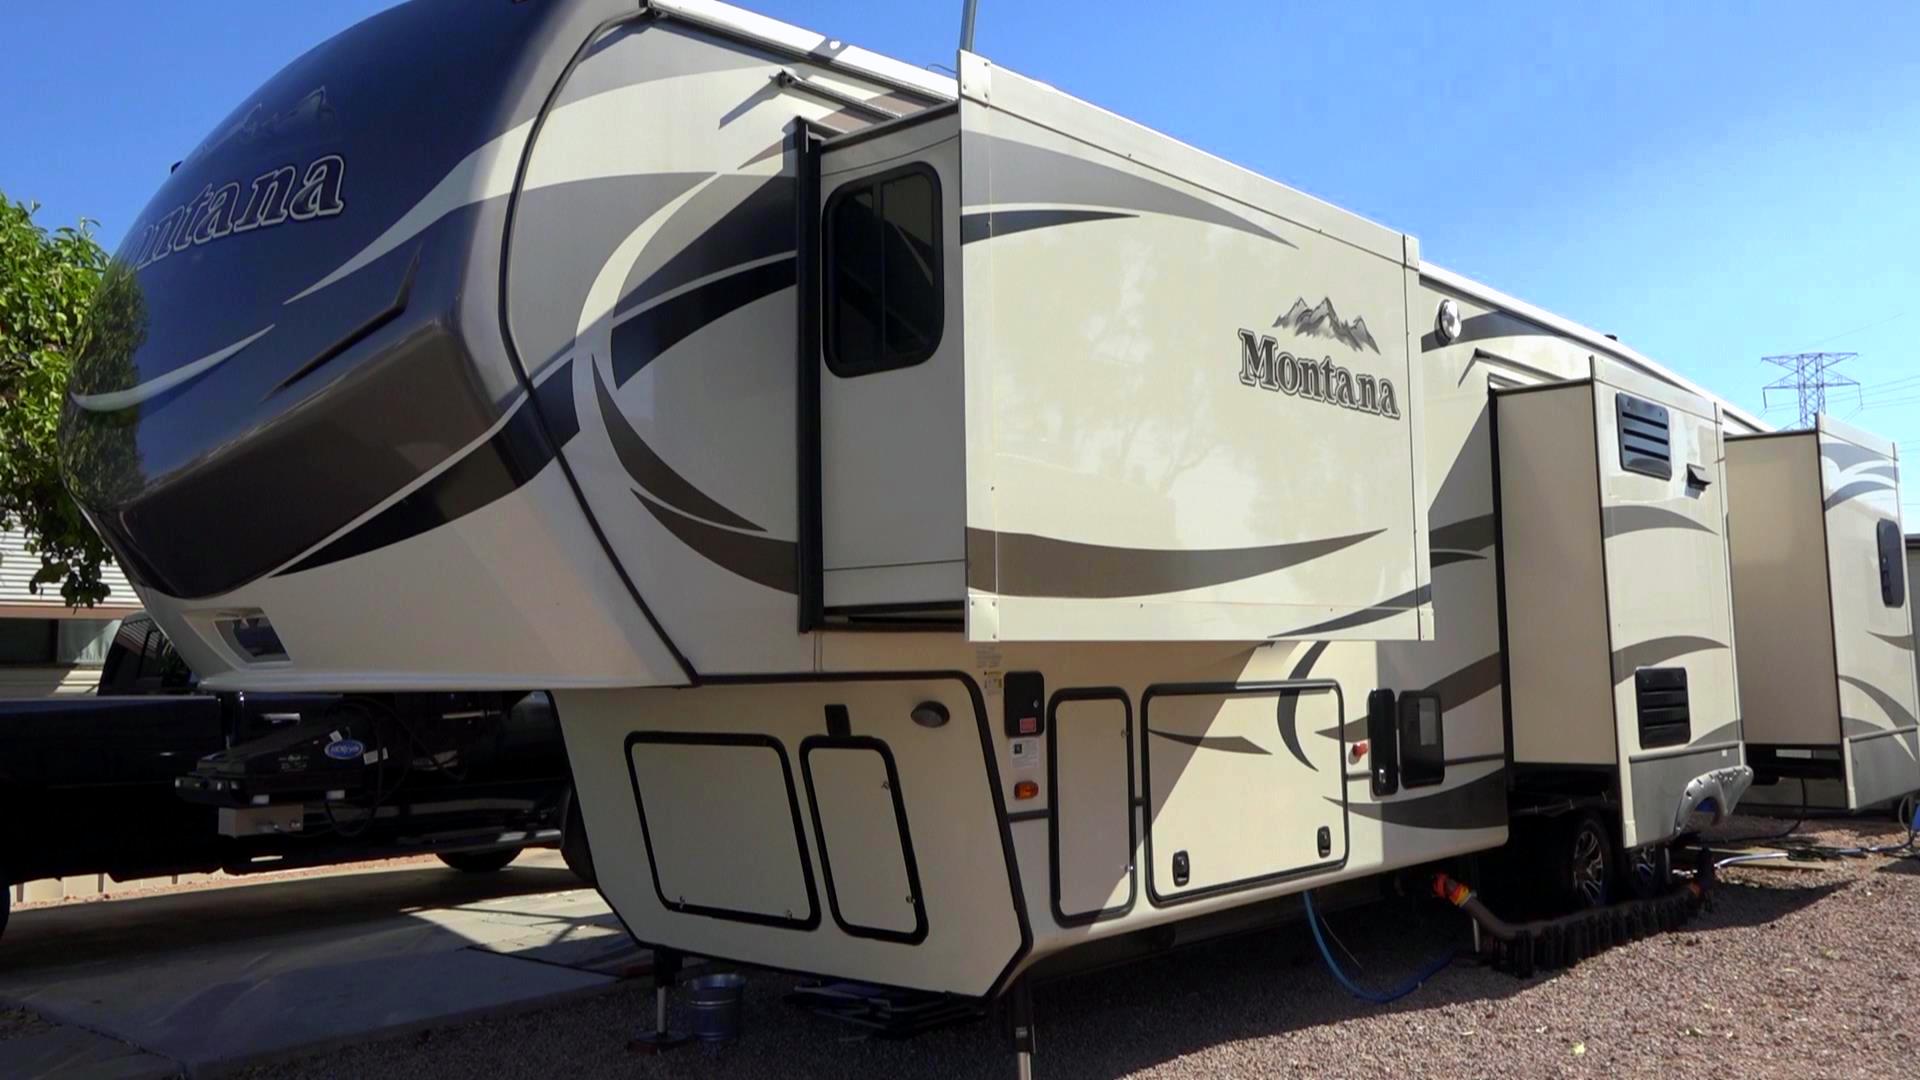 RV Maintenance Tips for 5th Wheels Motorhomes and Travel Trailers